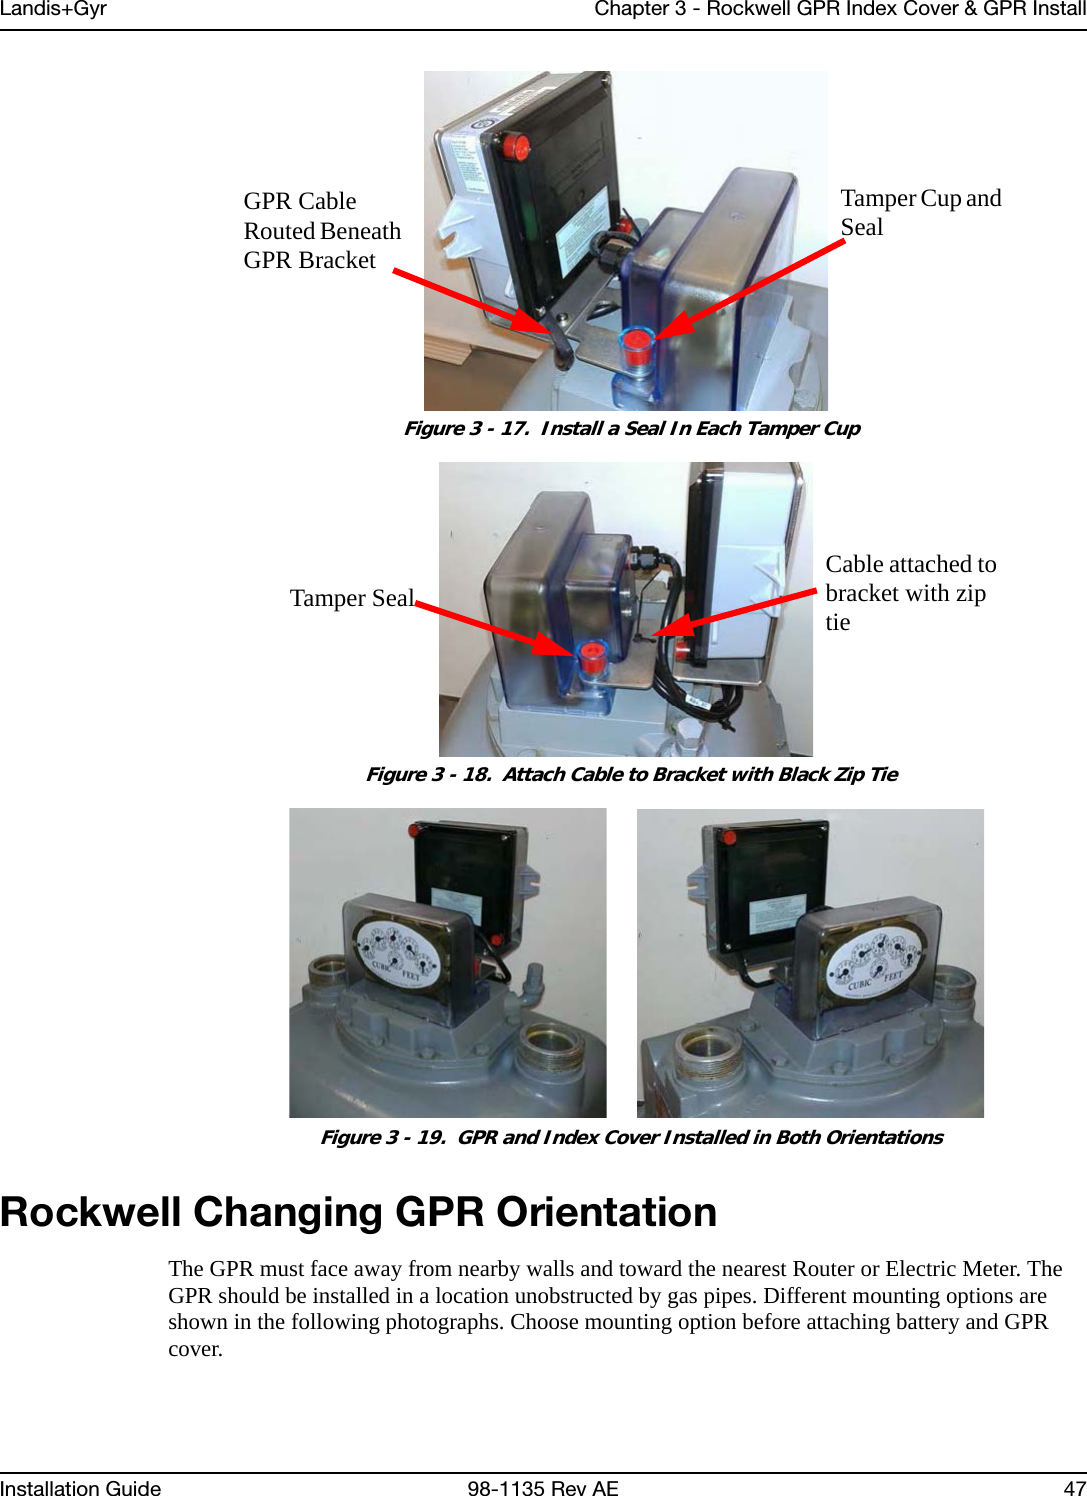 Landis+Gyr Chapter 3 - Rockwell GPR Index Cover &amp; GPR InstallInstallation Guide 98-1135 Rev AE 47 Figure 3 - 17.  Install a Seal In Each Tamper Cup Figure 3 - 18.  Attach Cable to Bracket with Black Zip Tie Figure 3 - 19.  GPR and Index Cover Installed in Both OrientationsRockwell Changing GPR OrientationThe GPR must face away from nearby walls and toward the nearest Router or Electric Meter. The GPR should be installed in a location unobstructed by gas pipes. Different mounting options are shown in the following photographs. Choose mounting option before attaching battery and GPR cover.Tamper Cup and SealGPR Cable Routed Beneath GPR BracketTamper SealCable attached to bracket with zip tie